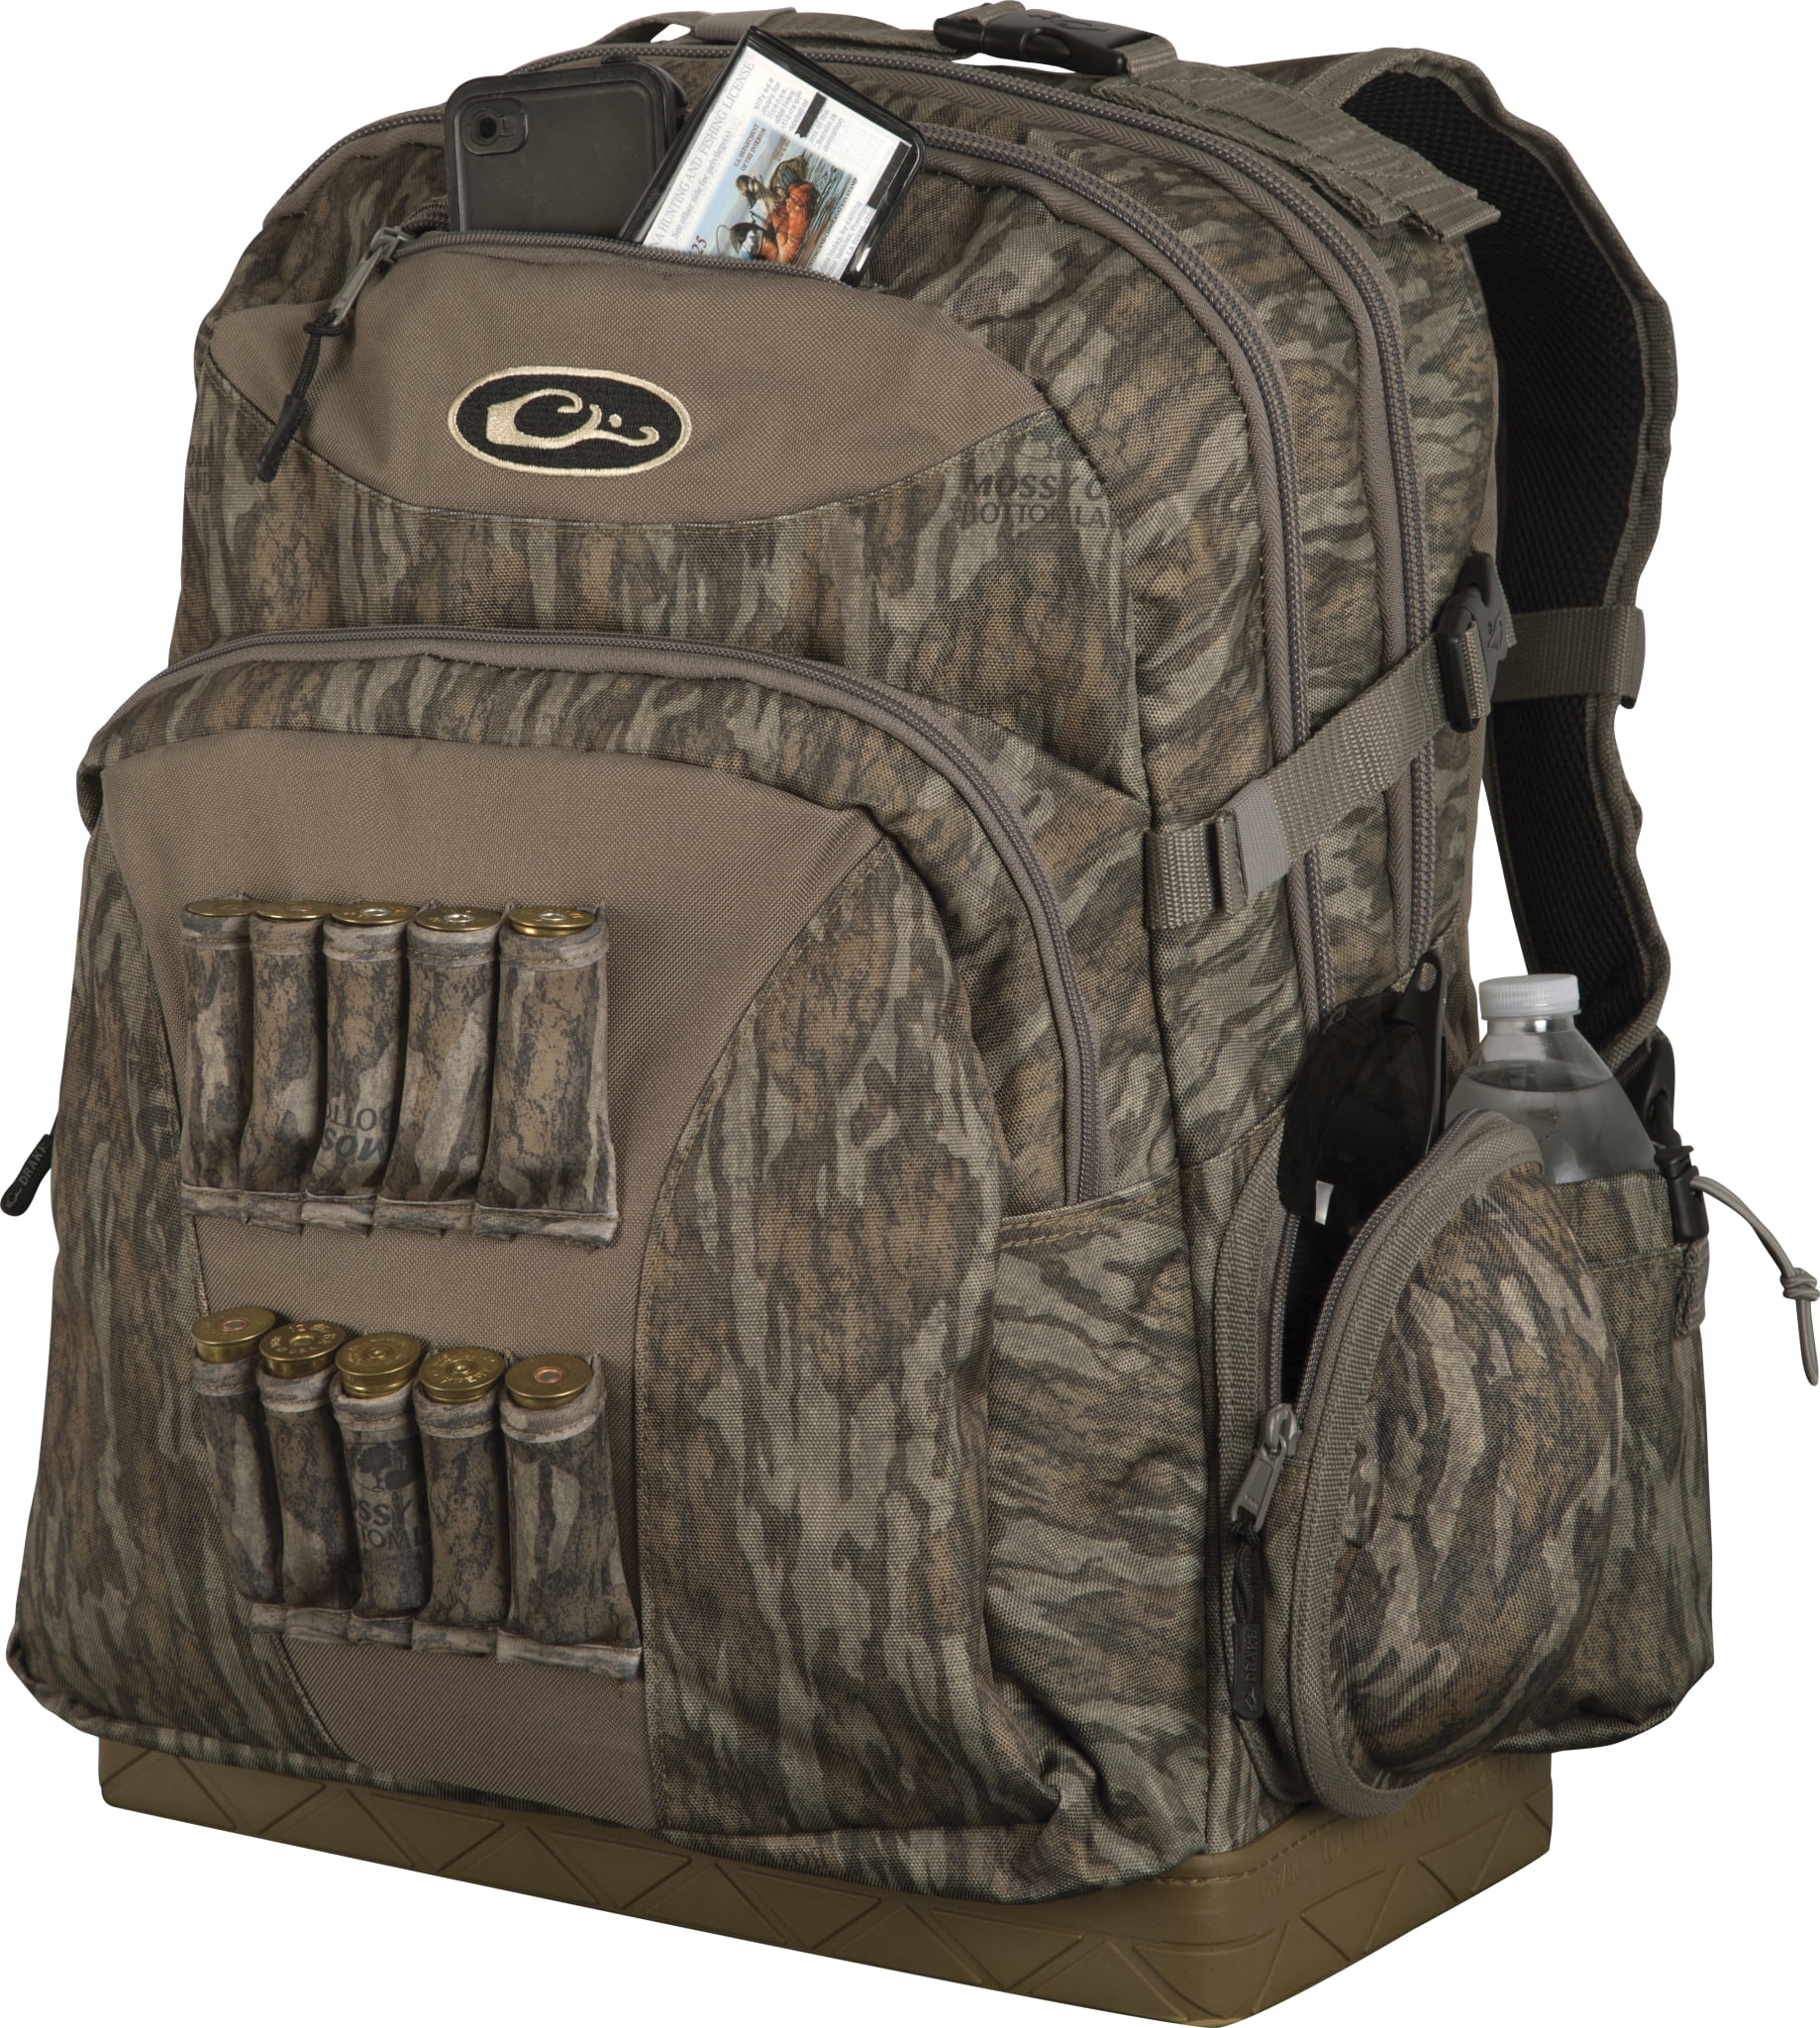 WALK IN PACK OLD SCHOOL CAMO DRAKE WATERFOWL CAMO DAYPACK BACK PACK